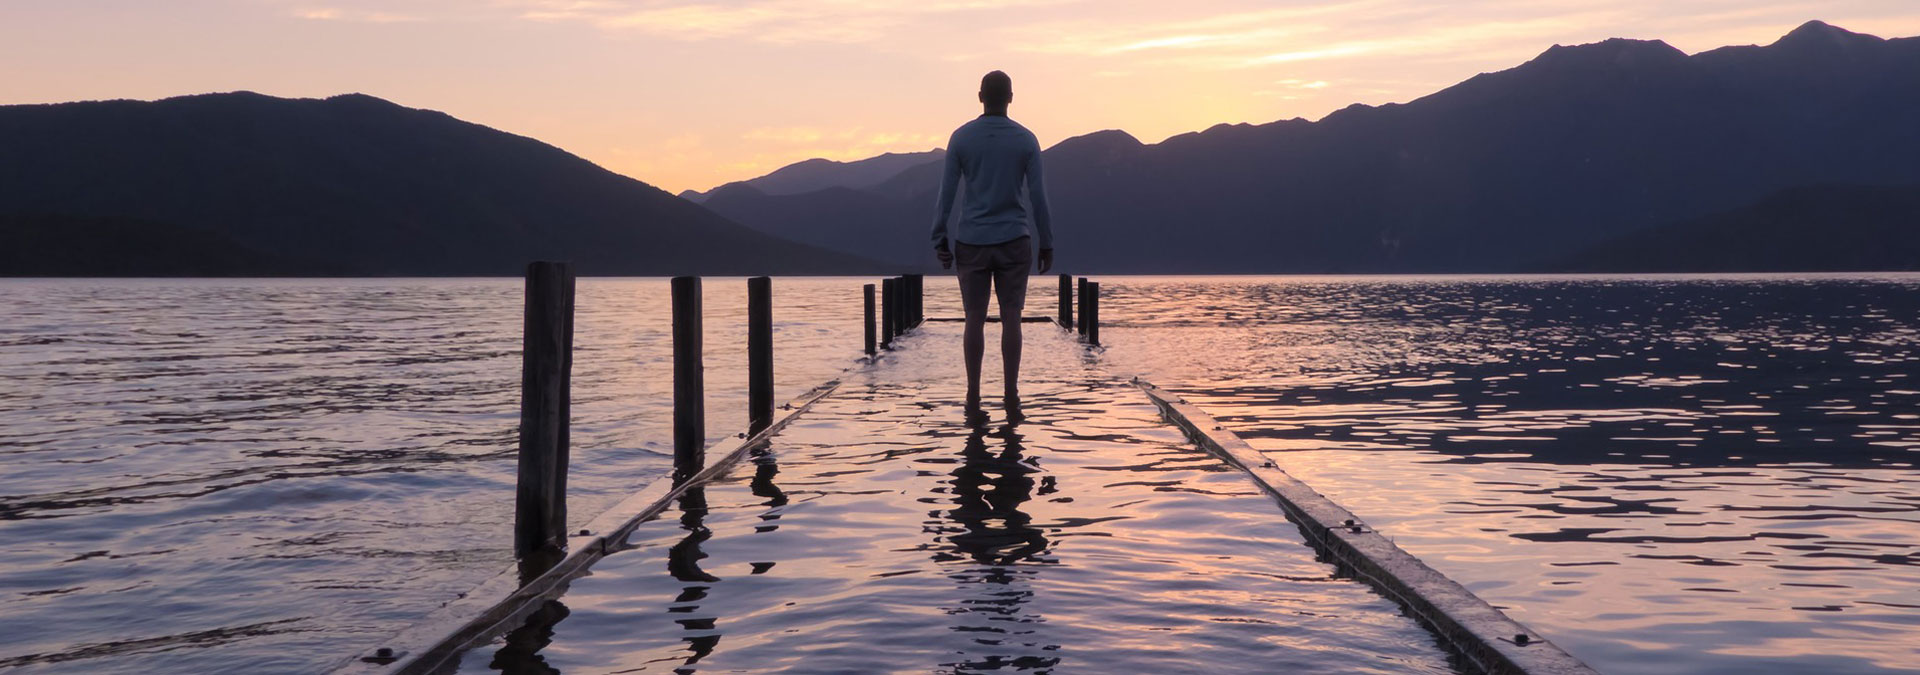 Higgaion.net header pic - person standing on dock